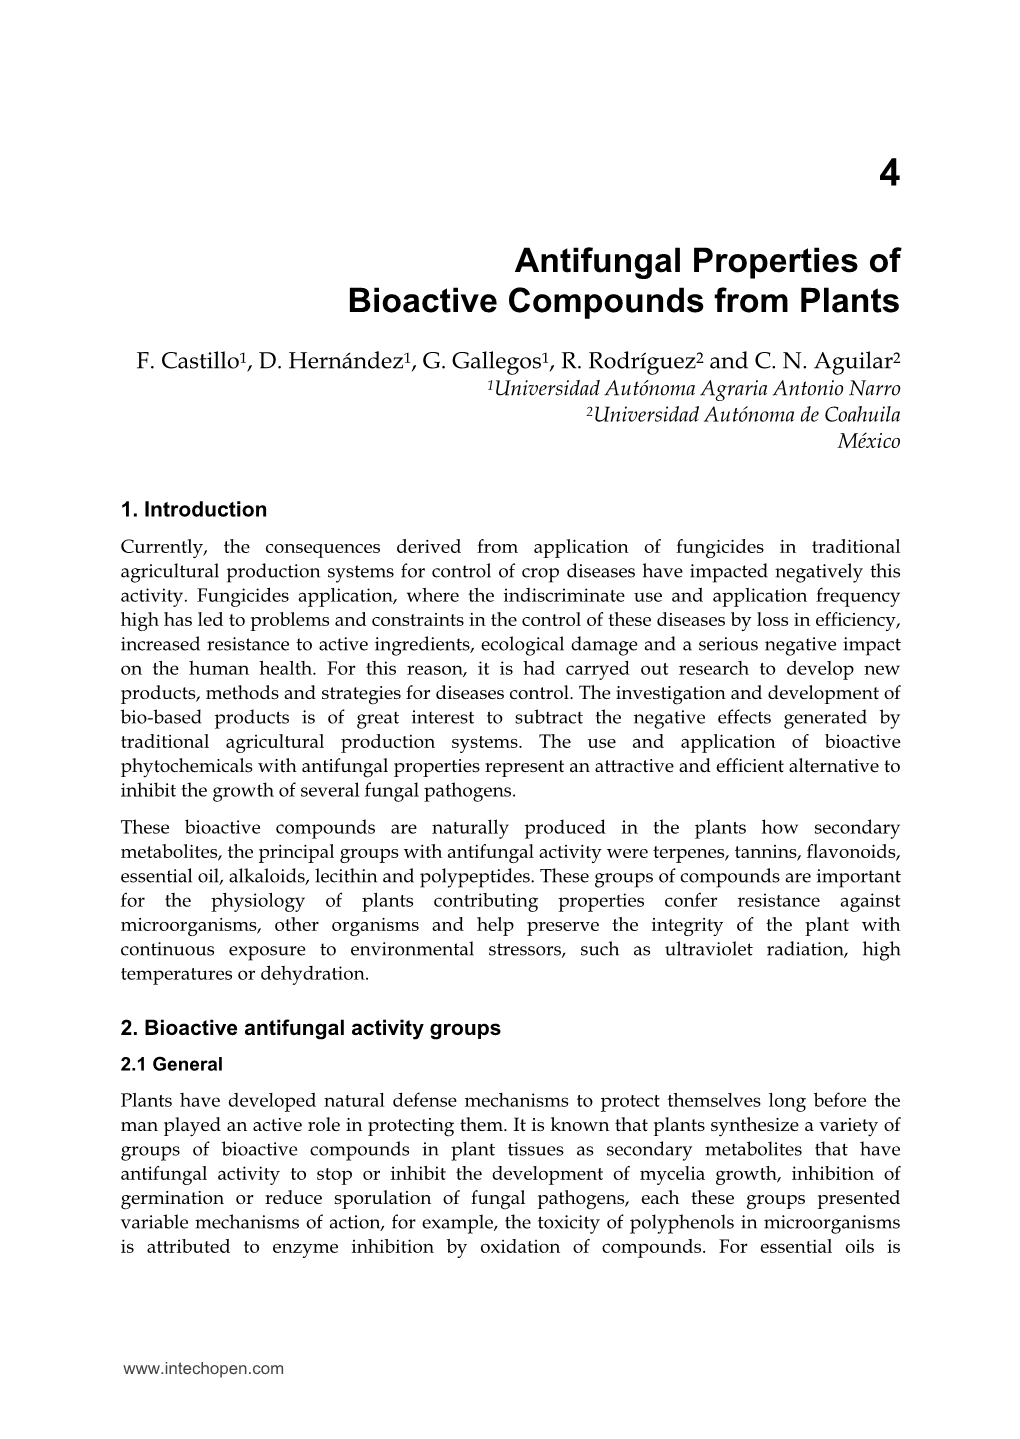 Antifungal Properties of Bioactive Compounds from Plants